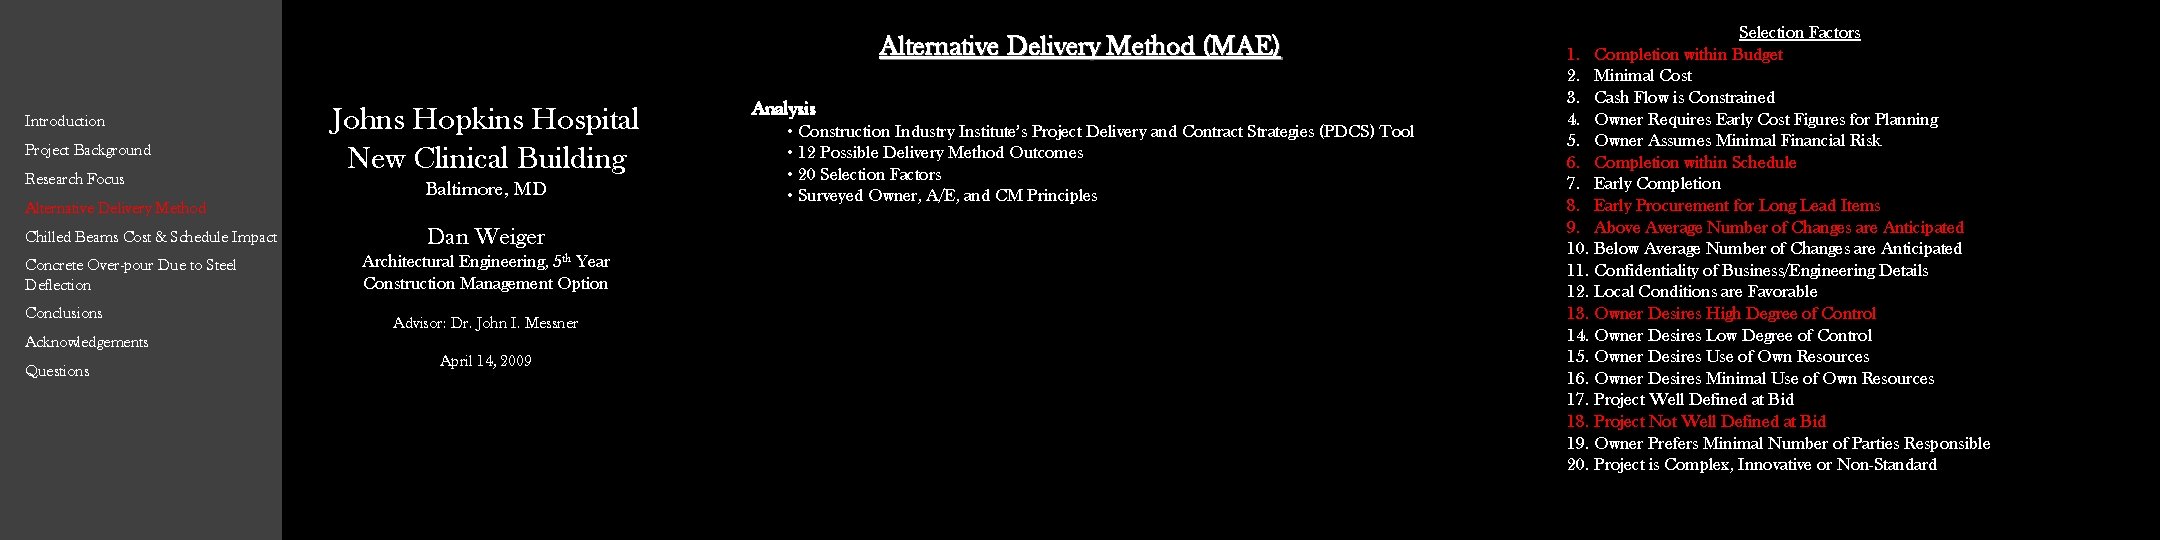 Alternative Delivery Method (MAE) Introduction Project Background Research Focus Alternative Delivery Method Chilled Beams